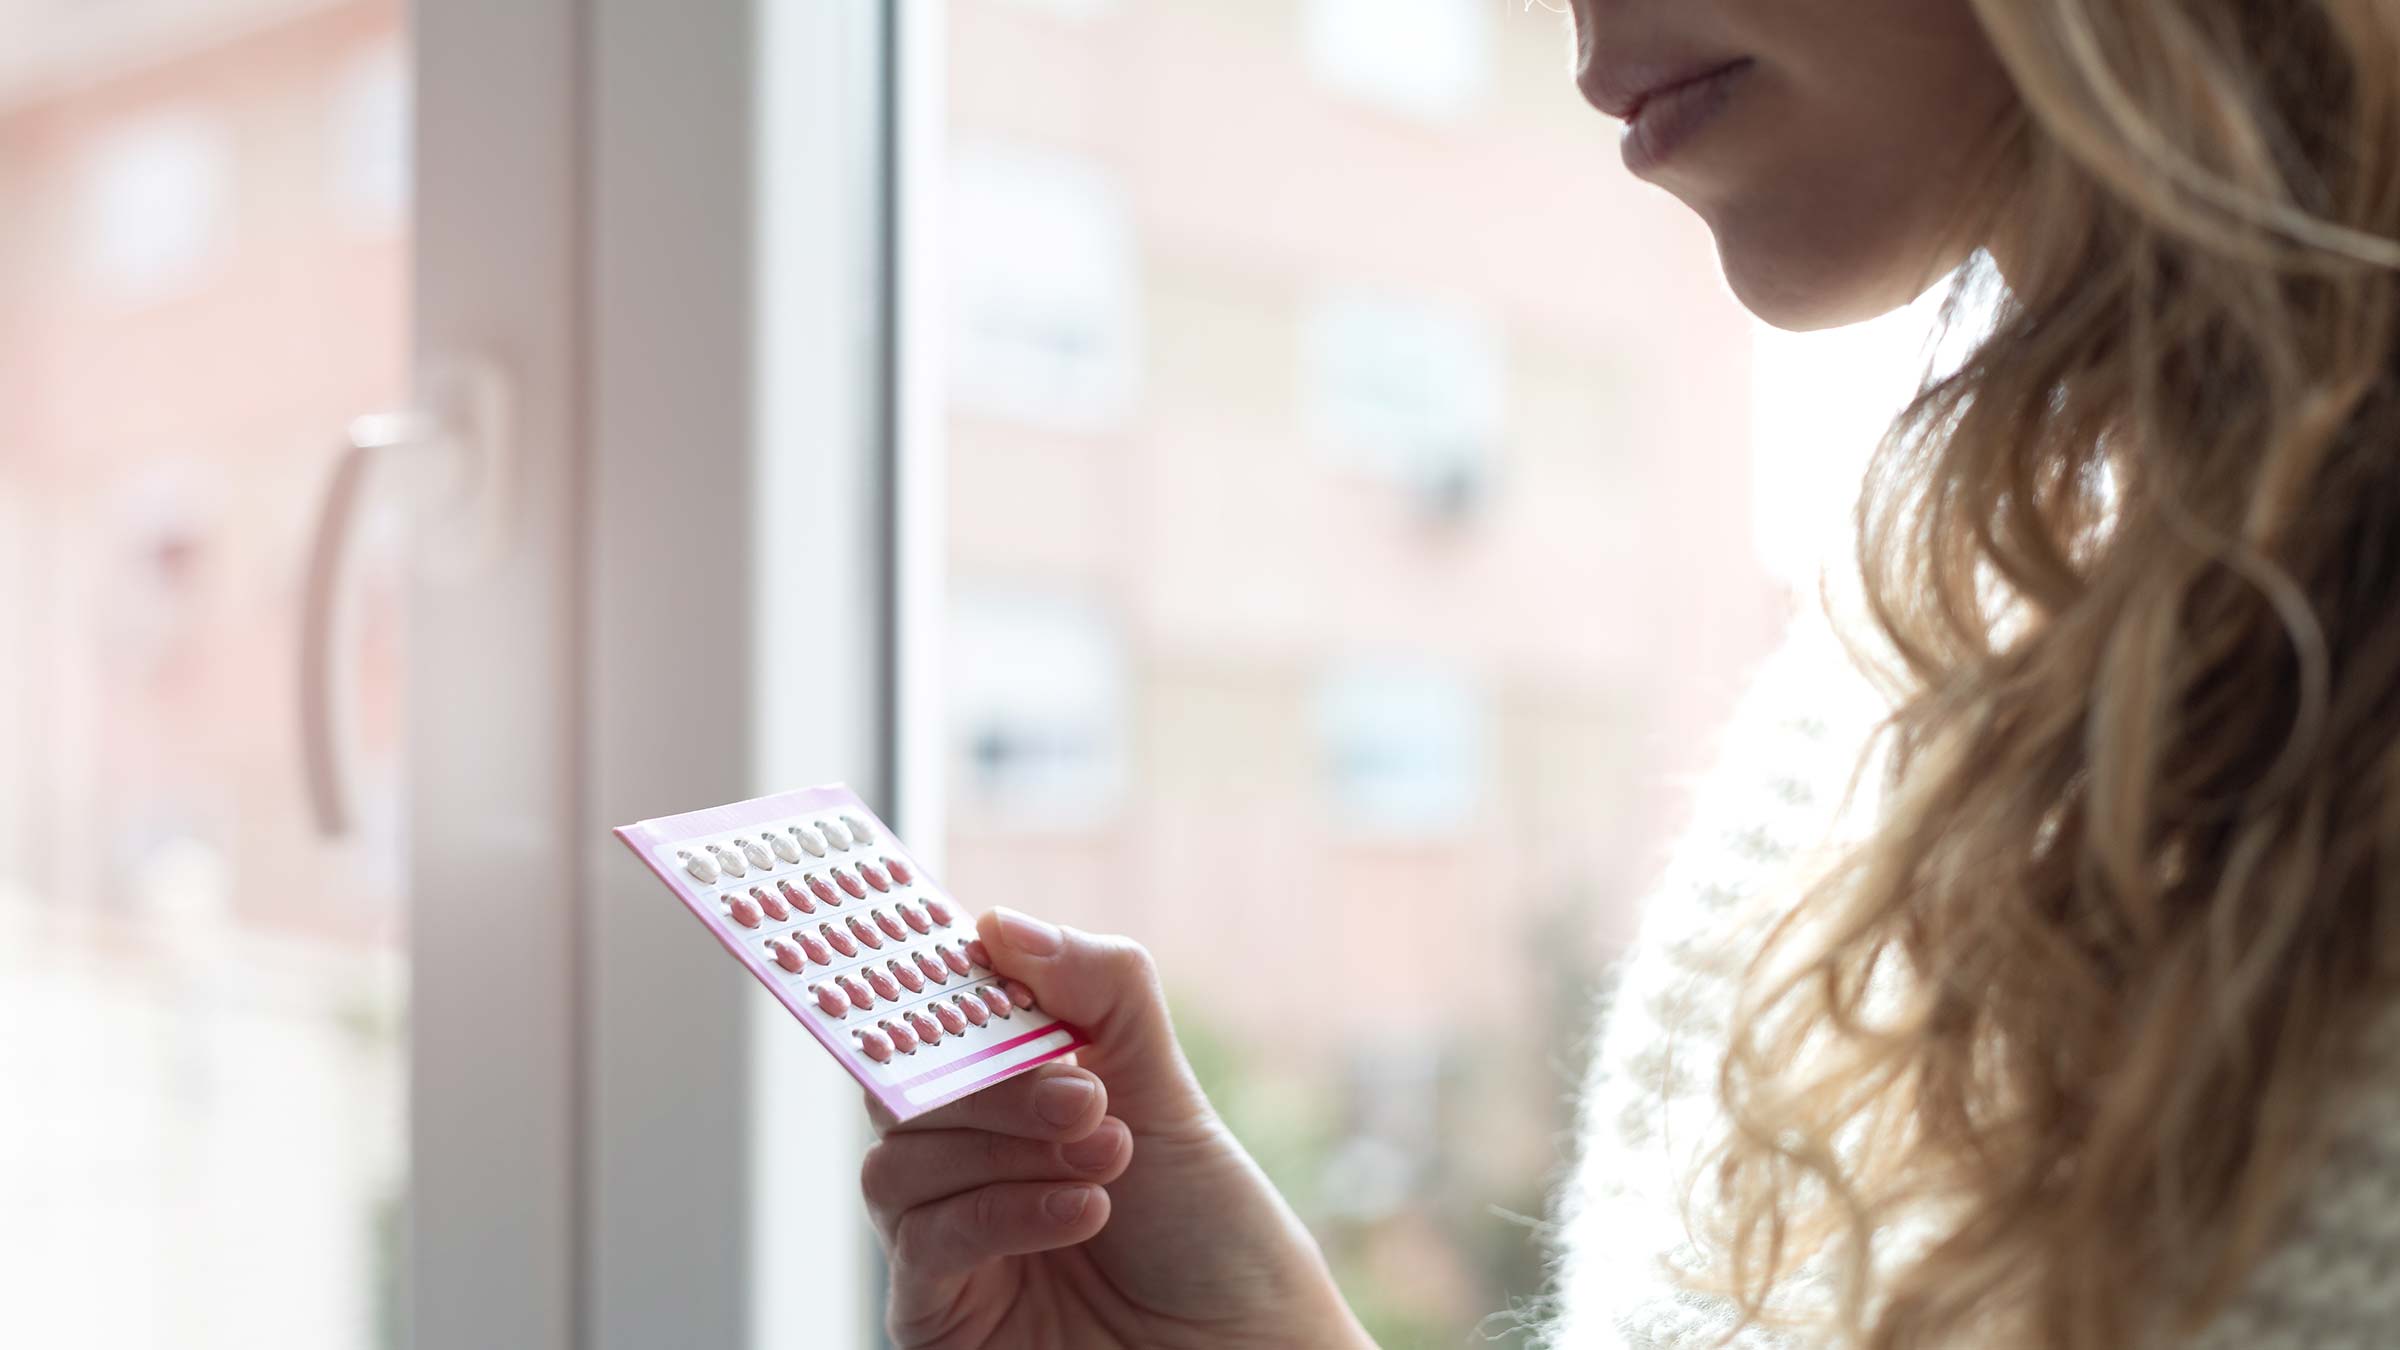 Is it safe to use birth control pills to skip periods?